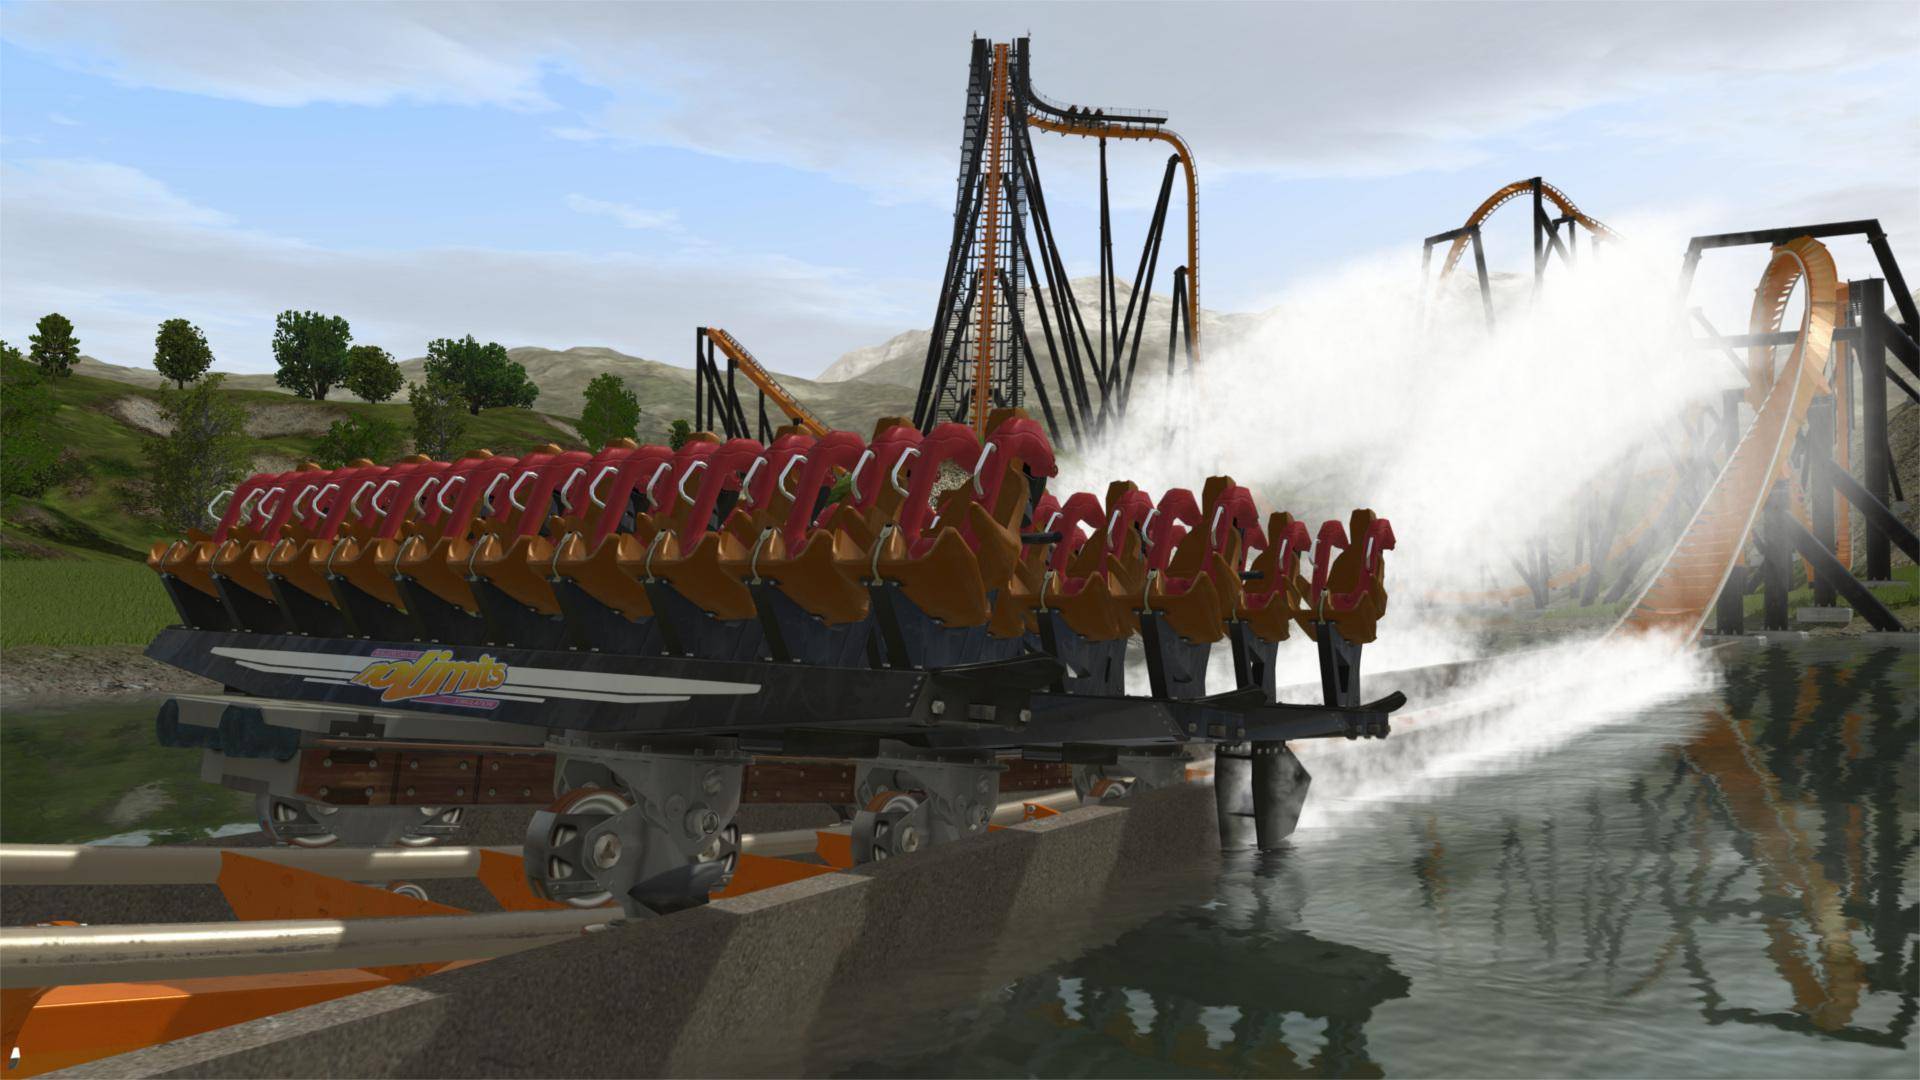 Buy Nolimits 2 Roller Coaster Simulation Pc Cd Key For Steam Compare Prices